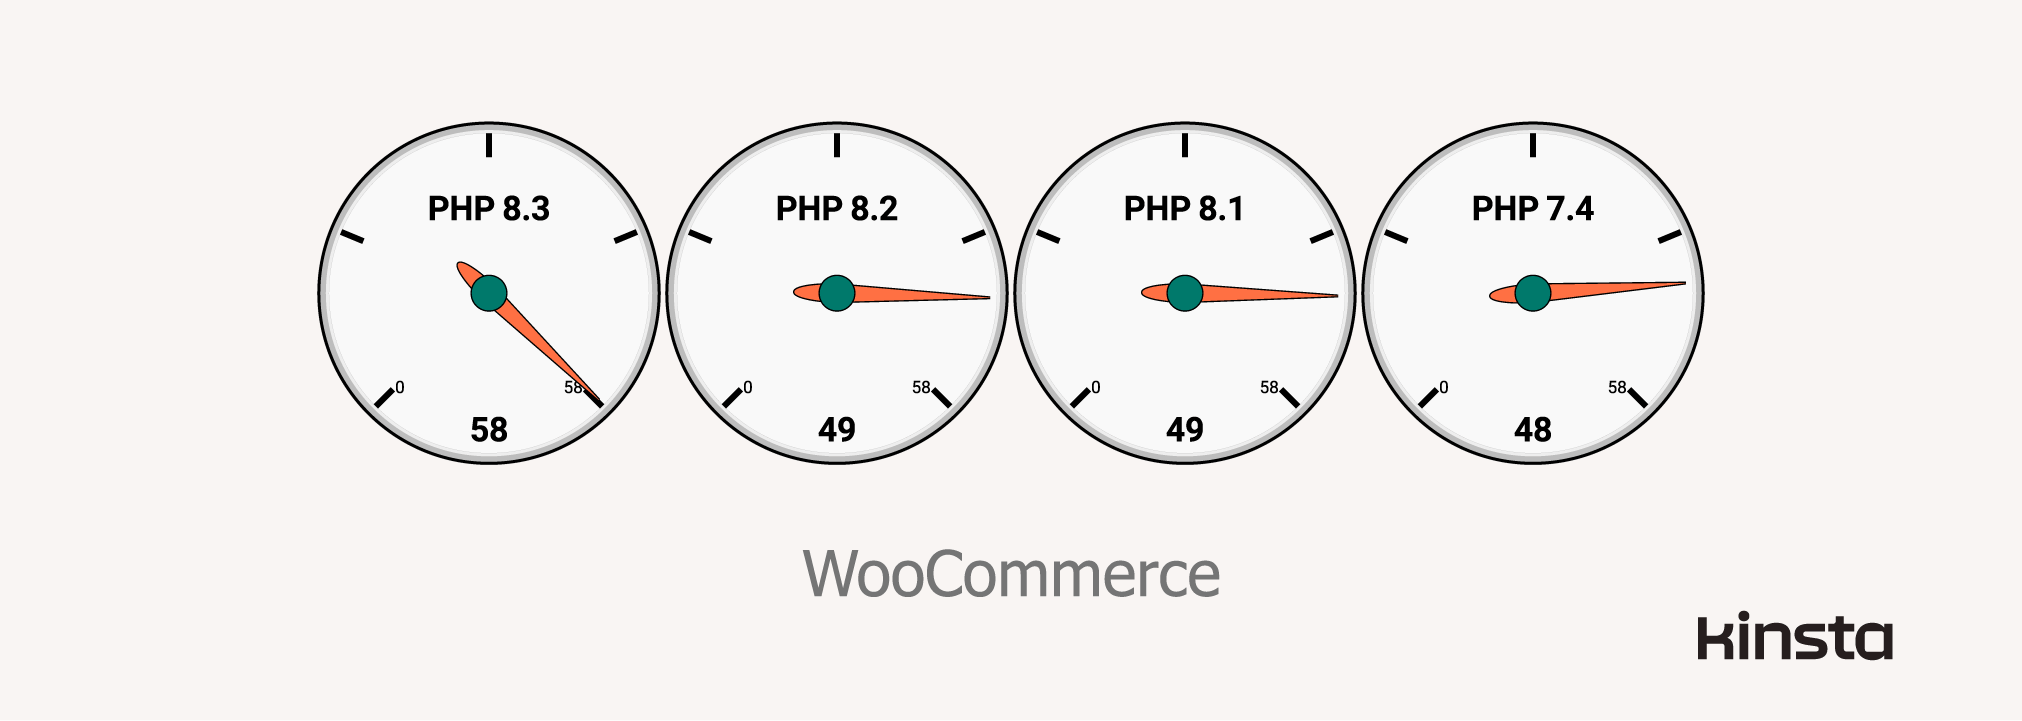 WooCommerce 7.9.0 performance on WordPress 6.2.2, on PHP 7.4, 8.1, 8.2, and 8.3 (in requests/second).